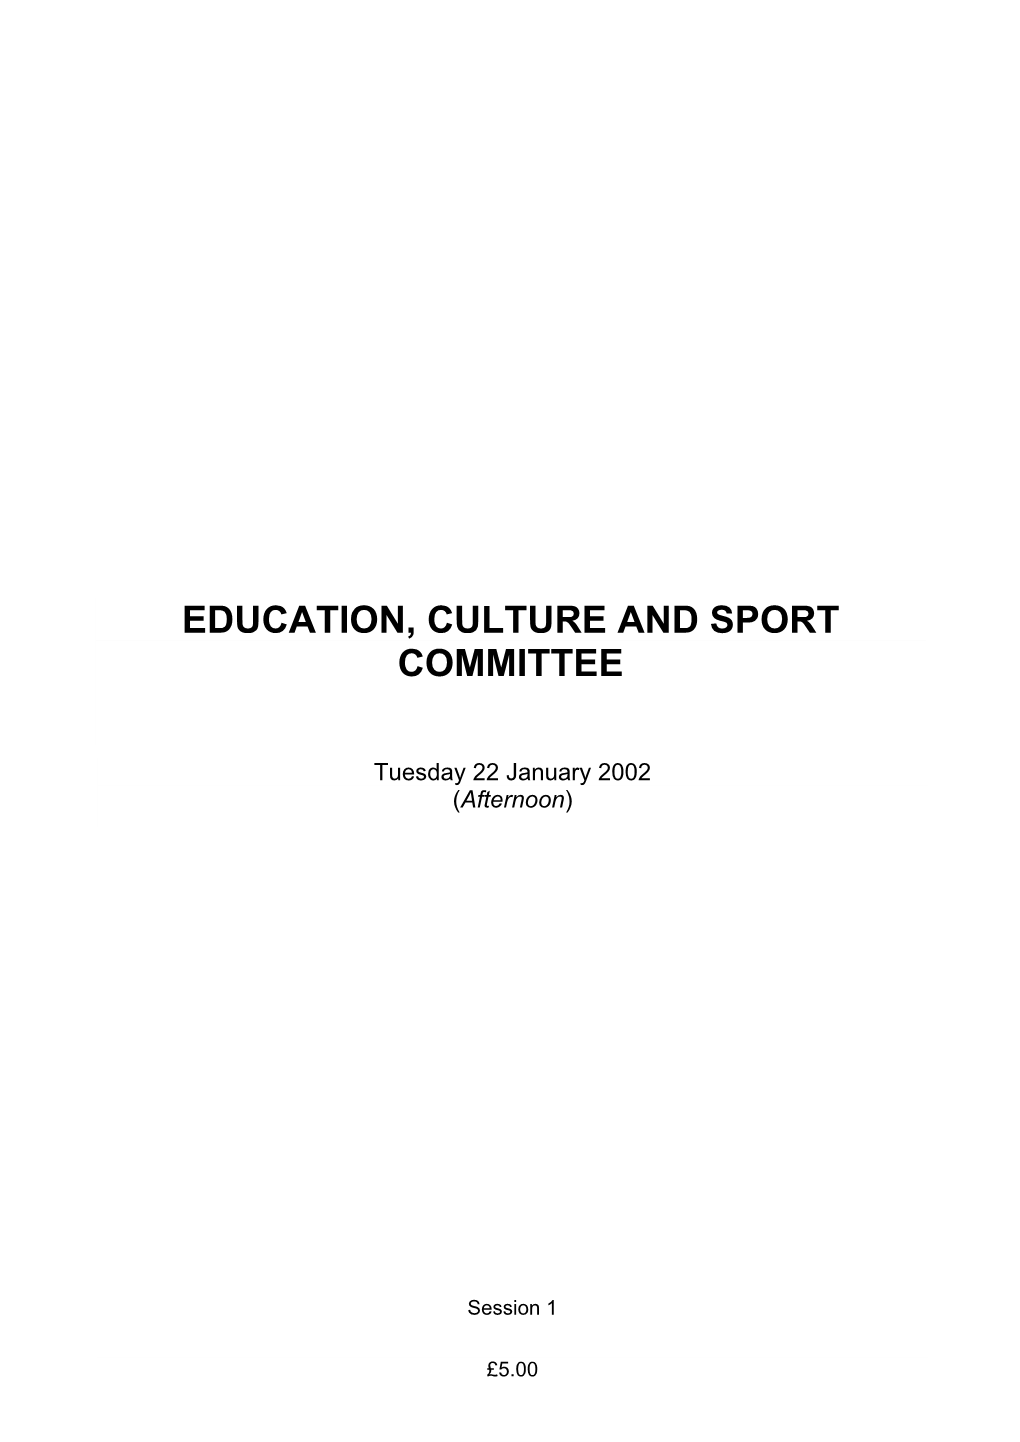 Education, Culture and Sport Committee